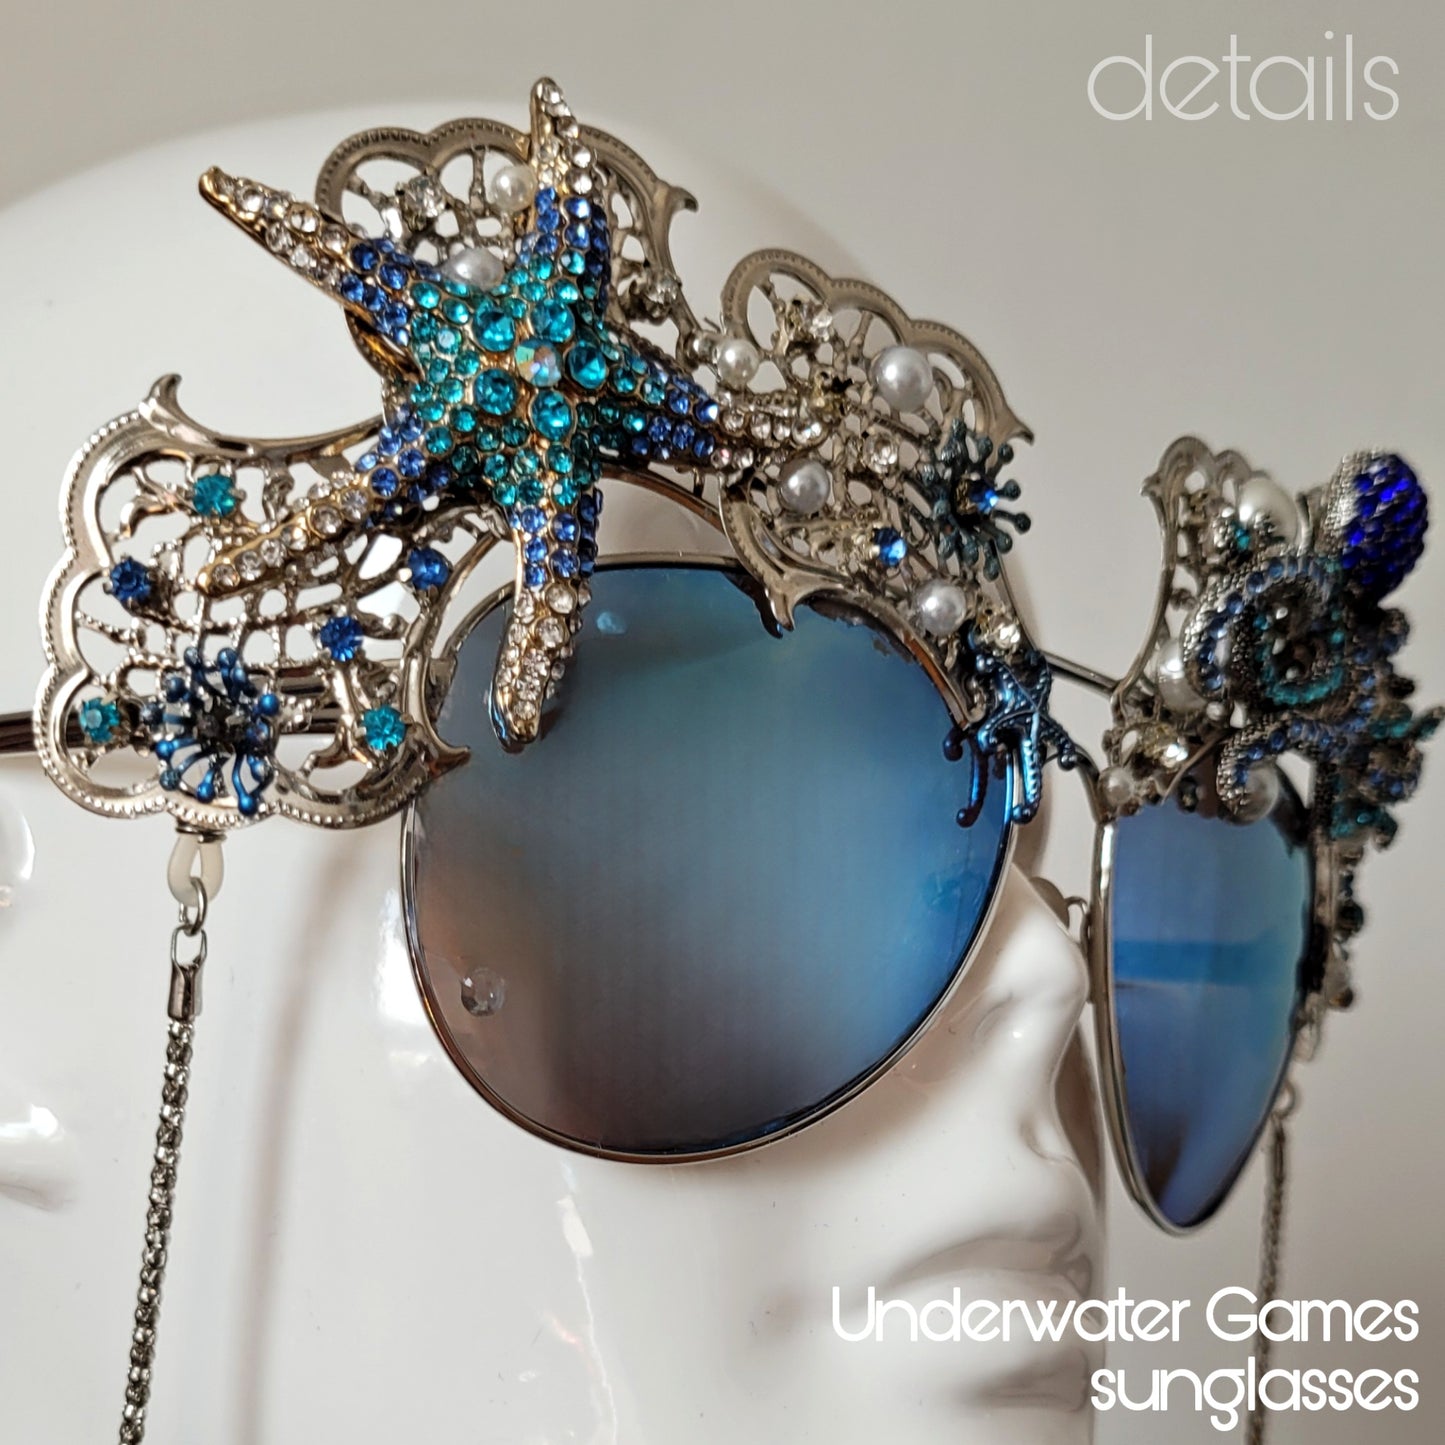 Shifting Depths collection: the Underwater Games sculptural sunglasses